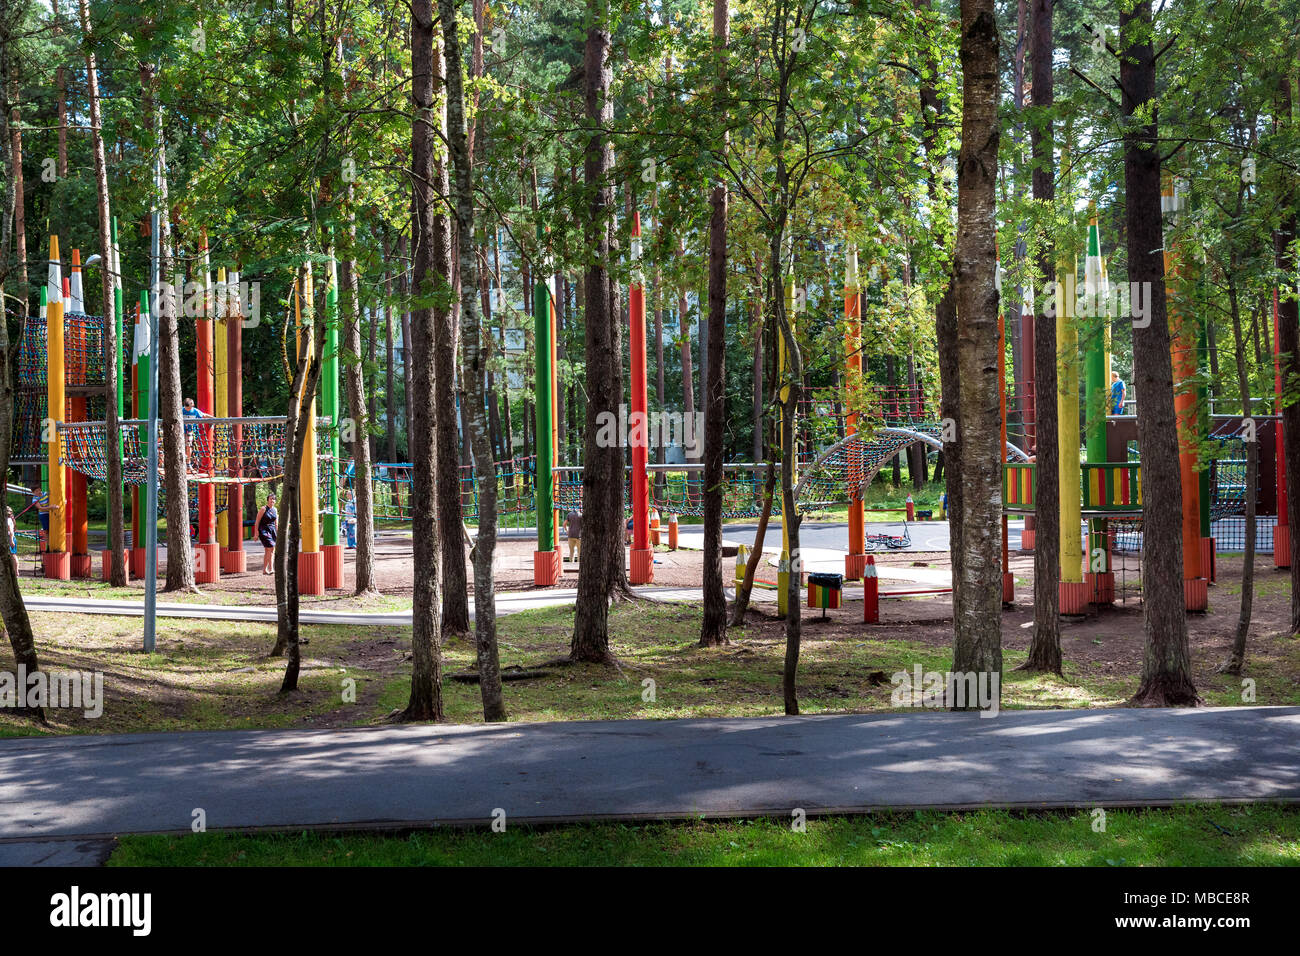 Ecological wooden playground Stock Photo